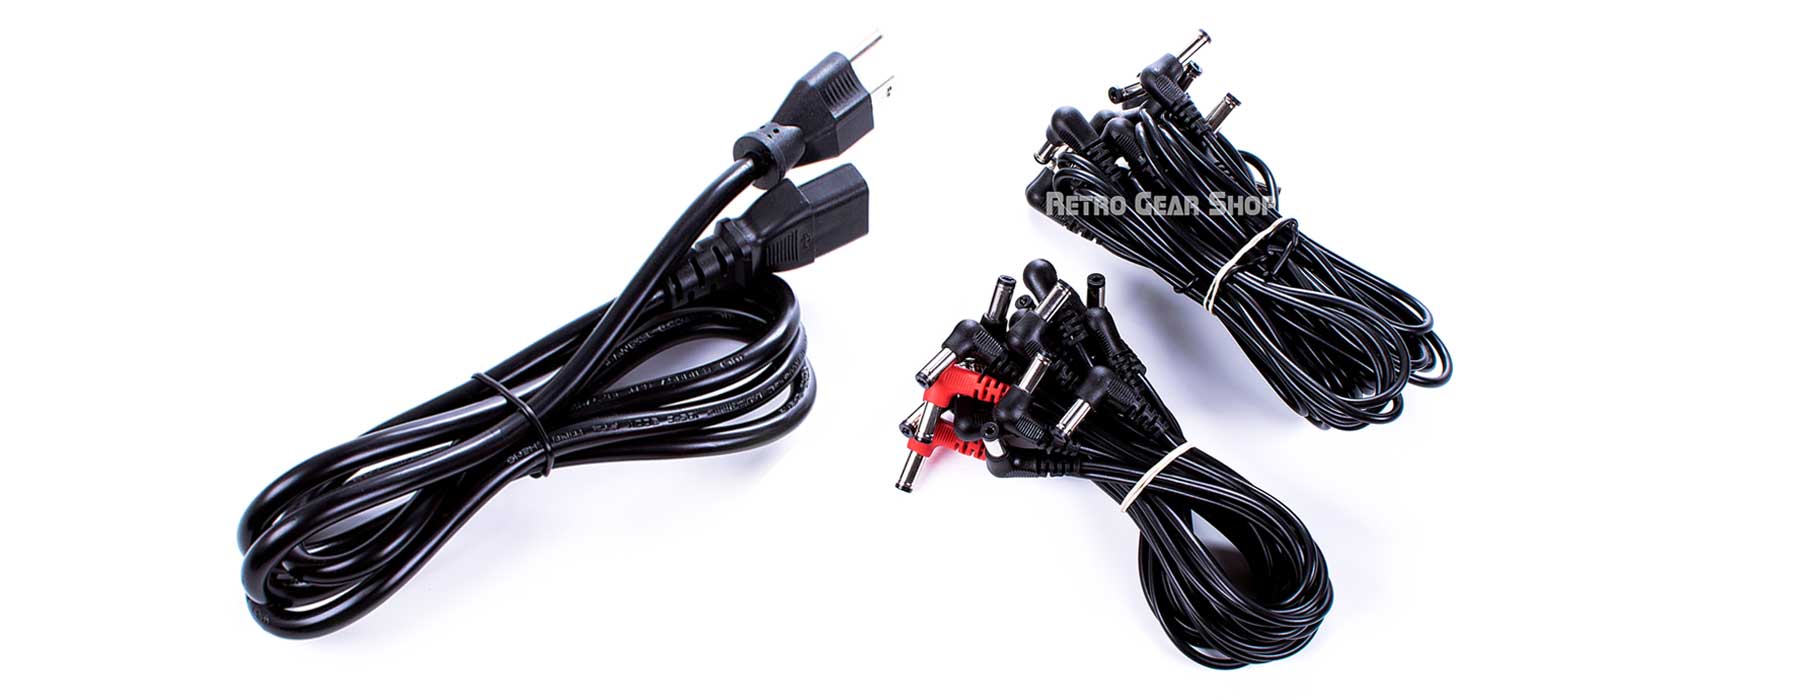 Walrus Audio Phoenix 15-output 120V USA Power Supply Power Cables